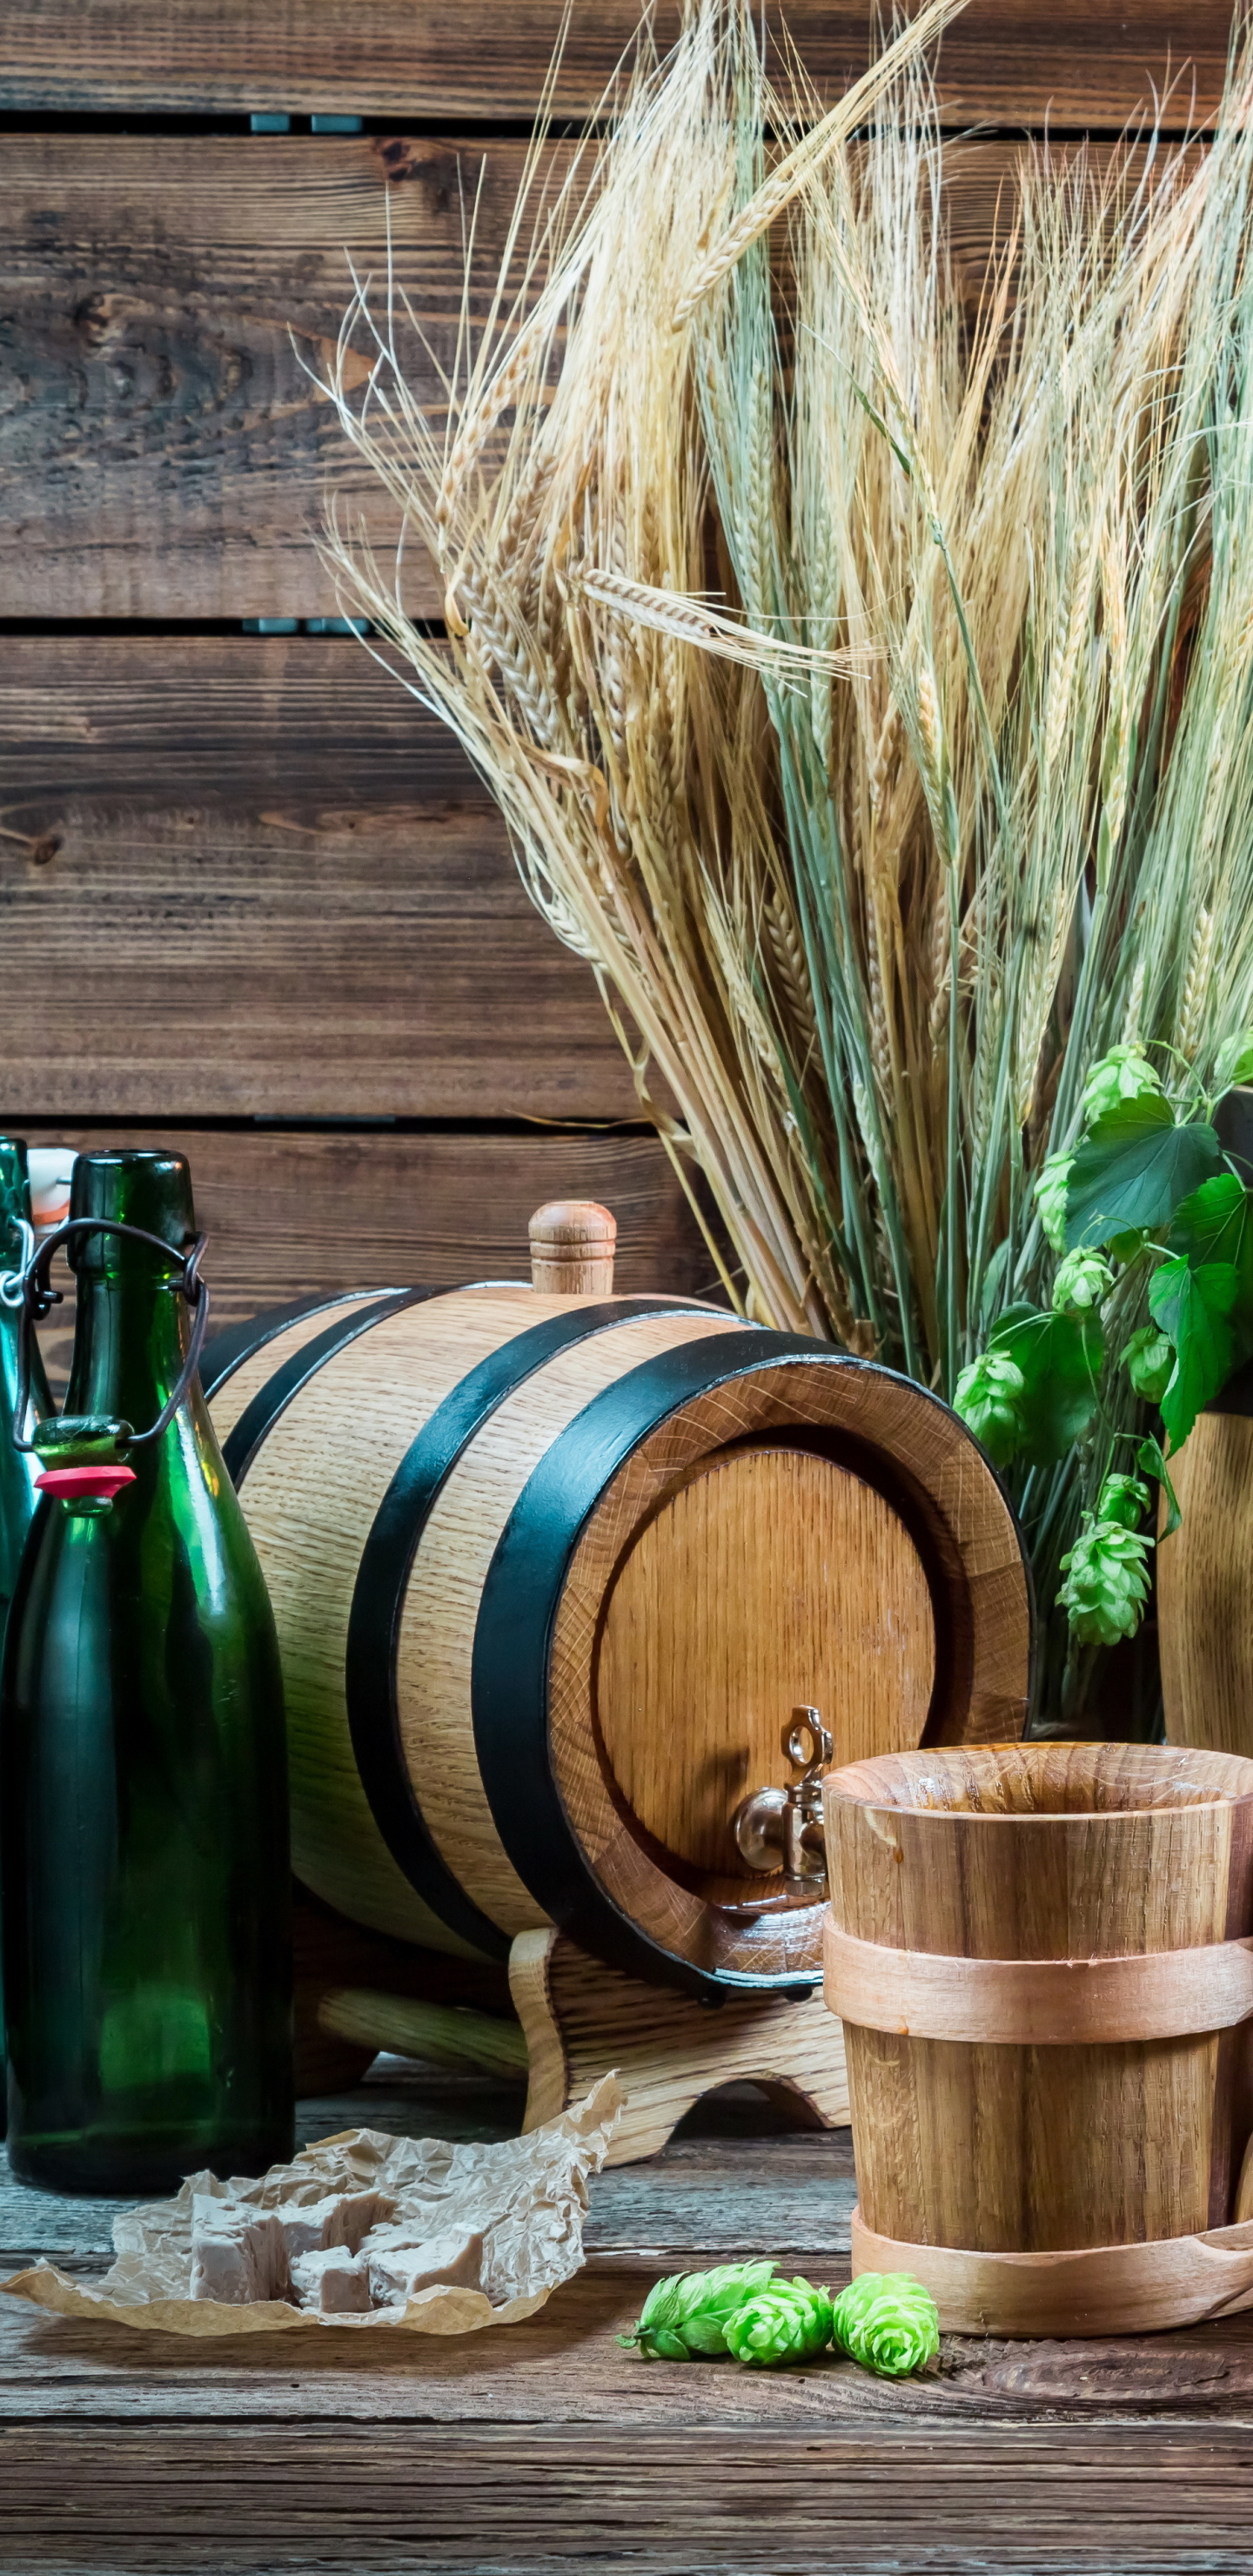 photography, still life, barrel, wheat, beer, alcohol, bottle